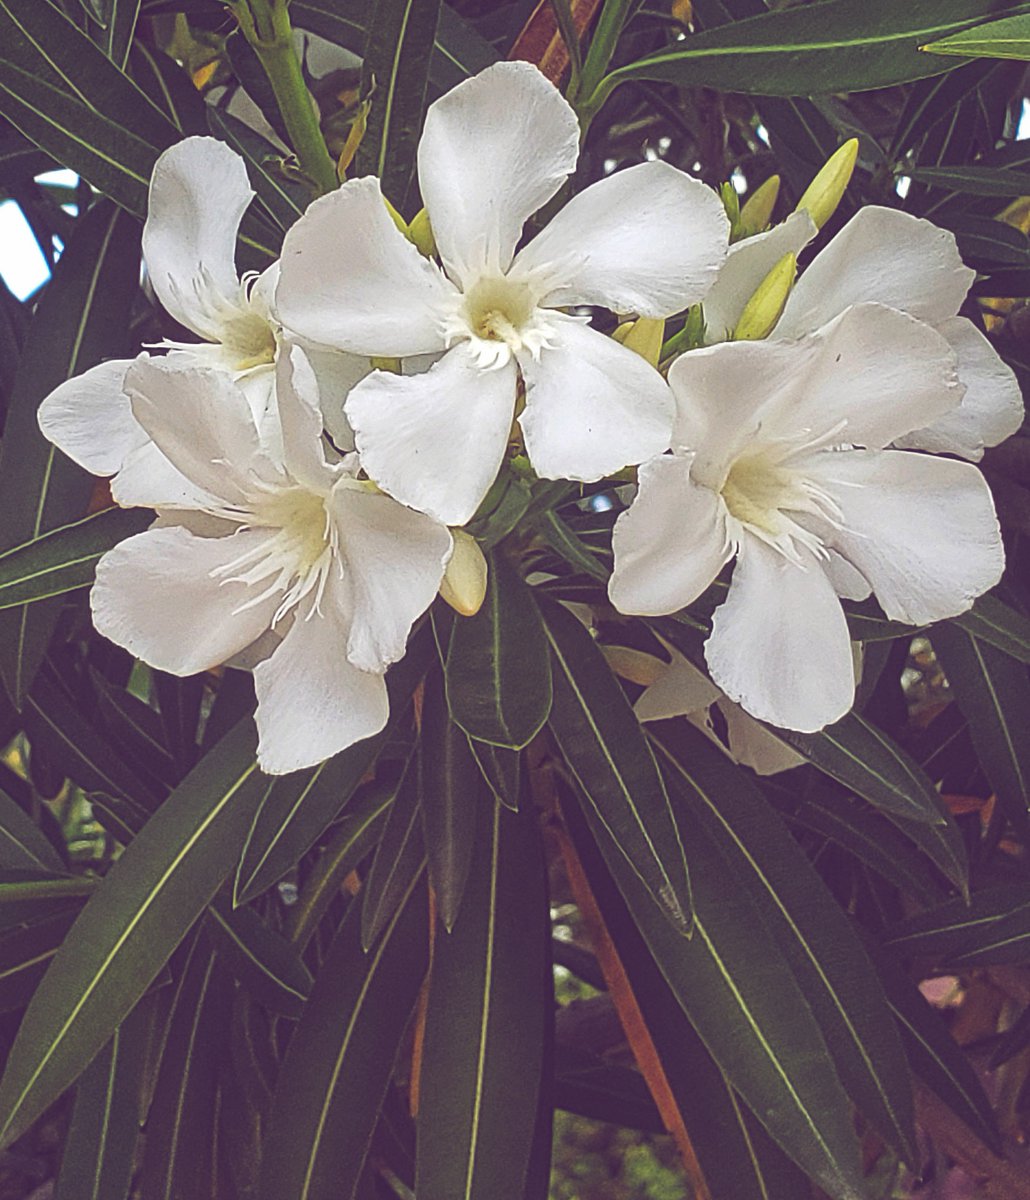 It isn't what happens to us that causes us to suffer; it's what we say to ourselves about what happens. ~Pema Chodron

#lovemorefearless #unconditionallove #mothertoall #changeyourthoughts  #loveternally #shadowwork #love #pemachodron #oleander #poisonintomedicine #fridayflowers